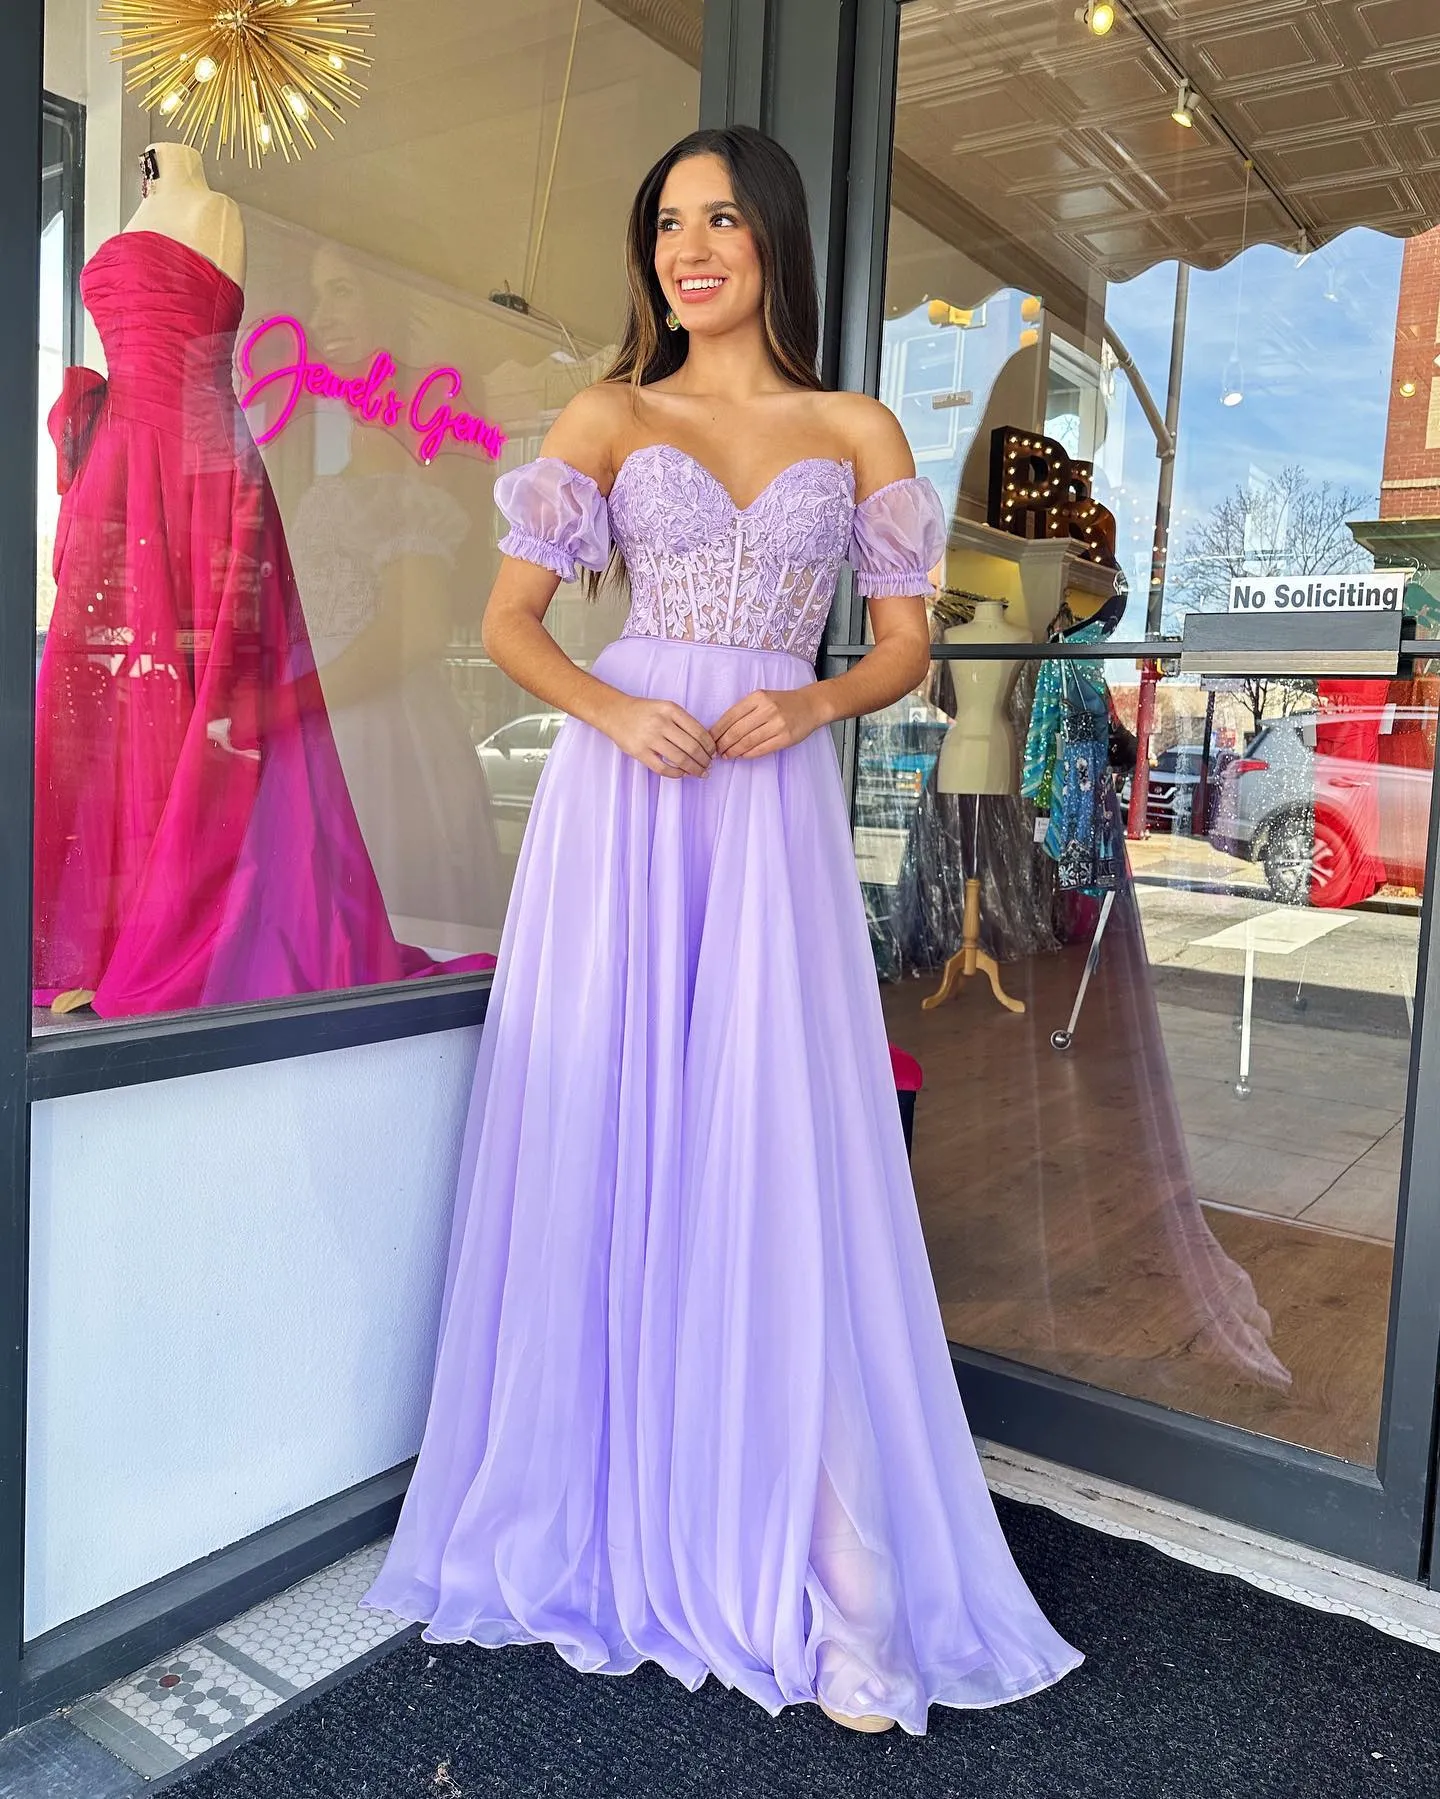 Chiffon Corset Back Prom Dress With Detachable Balloon Puff Sleeves, Lace  Corset Top, A Line Slit, And Periwinkle Lilac Royal Perfect For Winter  Formal Events, Pageants, Red Carpet Parties, Or Red Carnivals